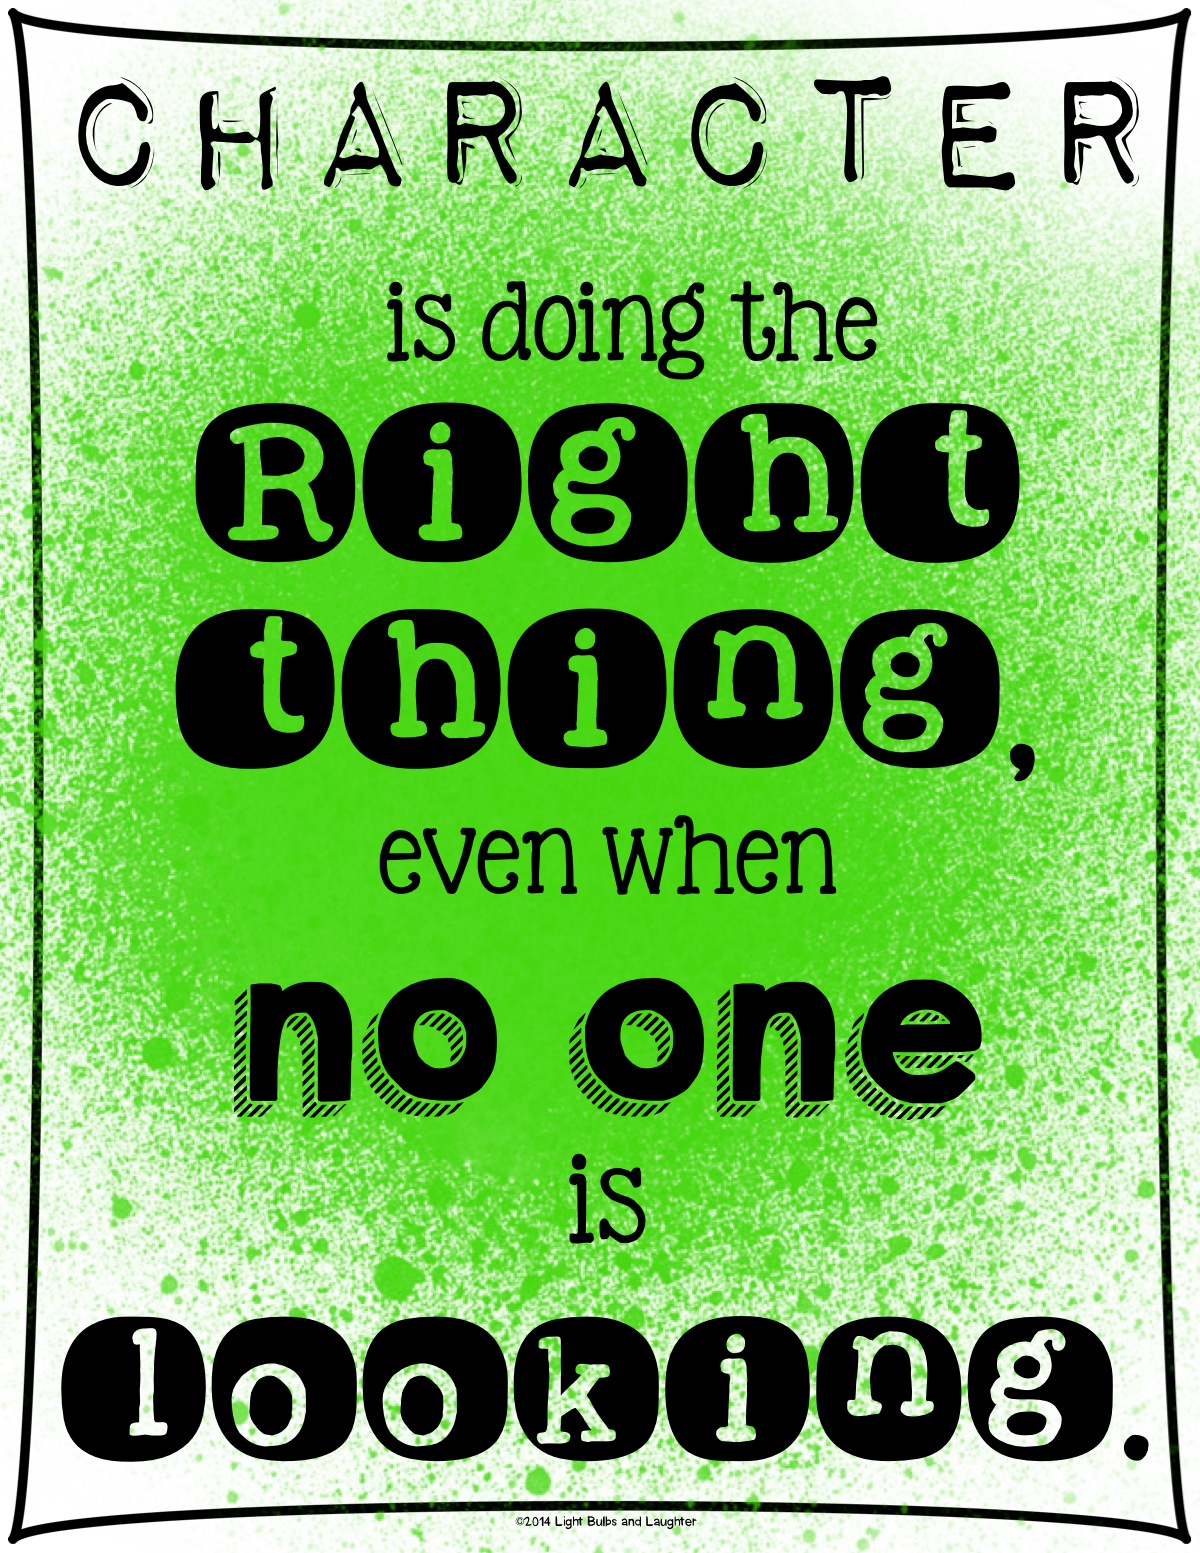 Classroom Posters For Every Teacher - Light Bulbs and Laughter